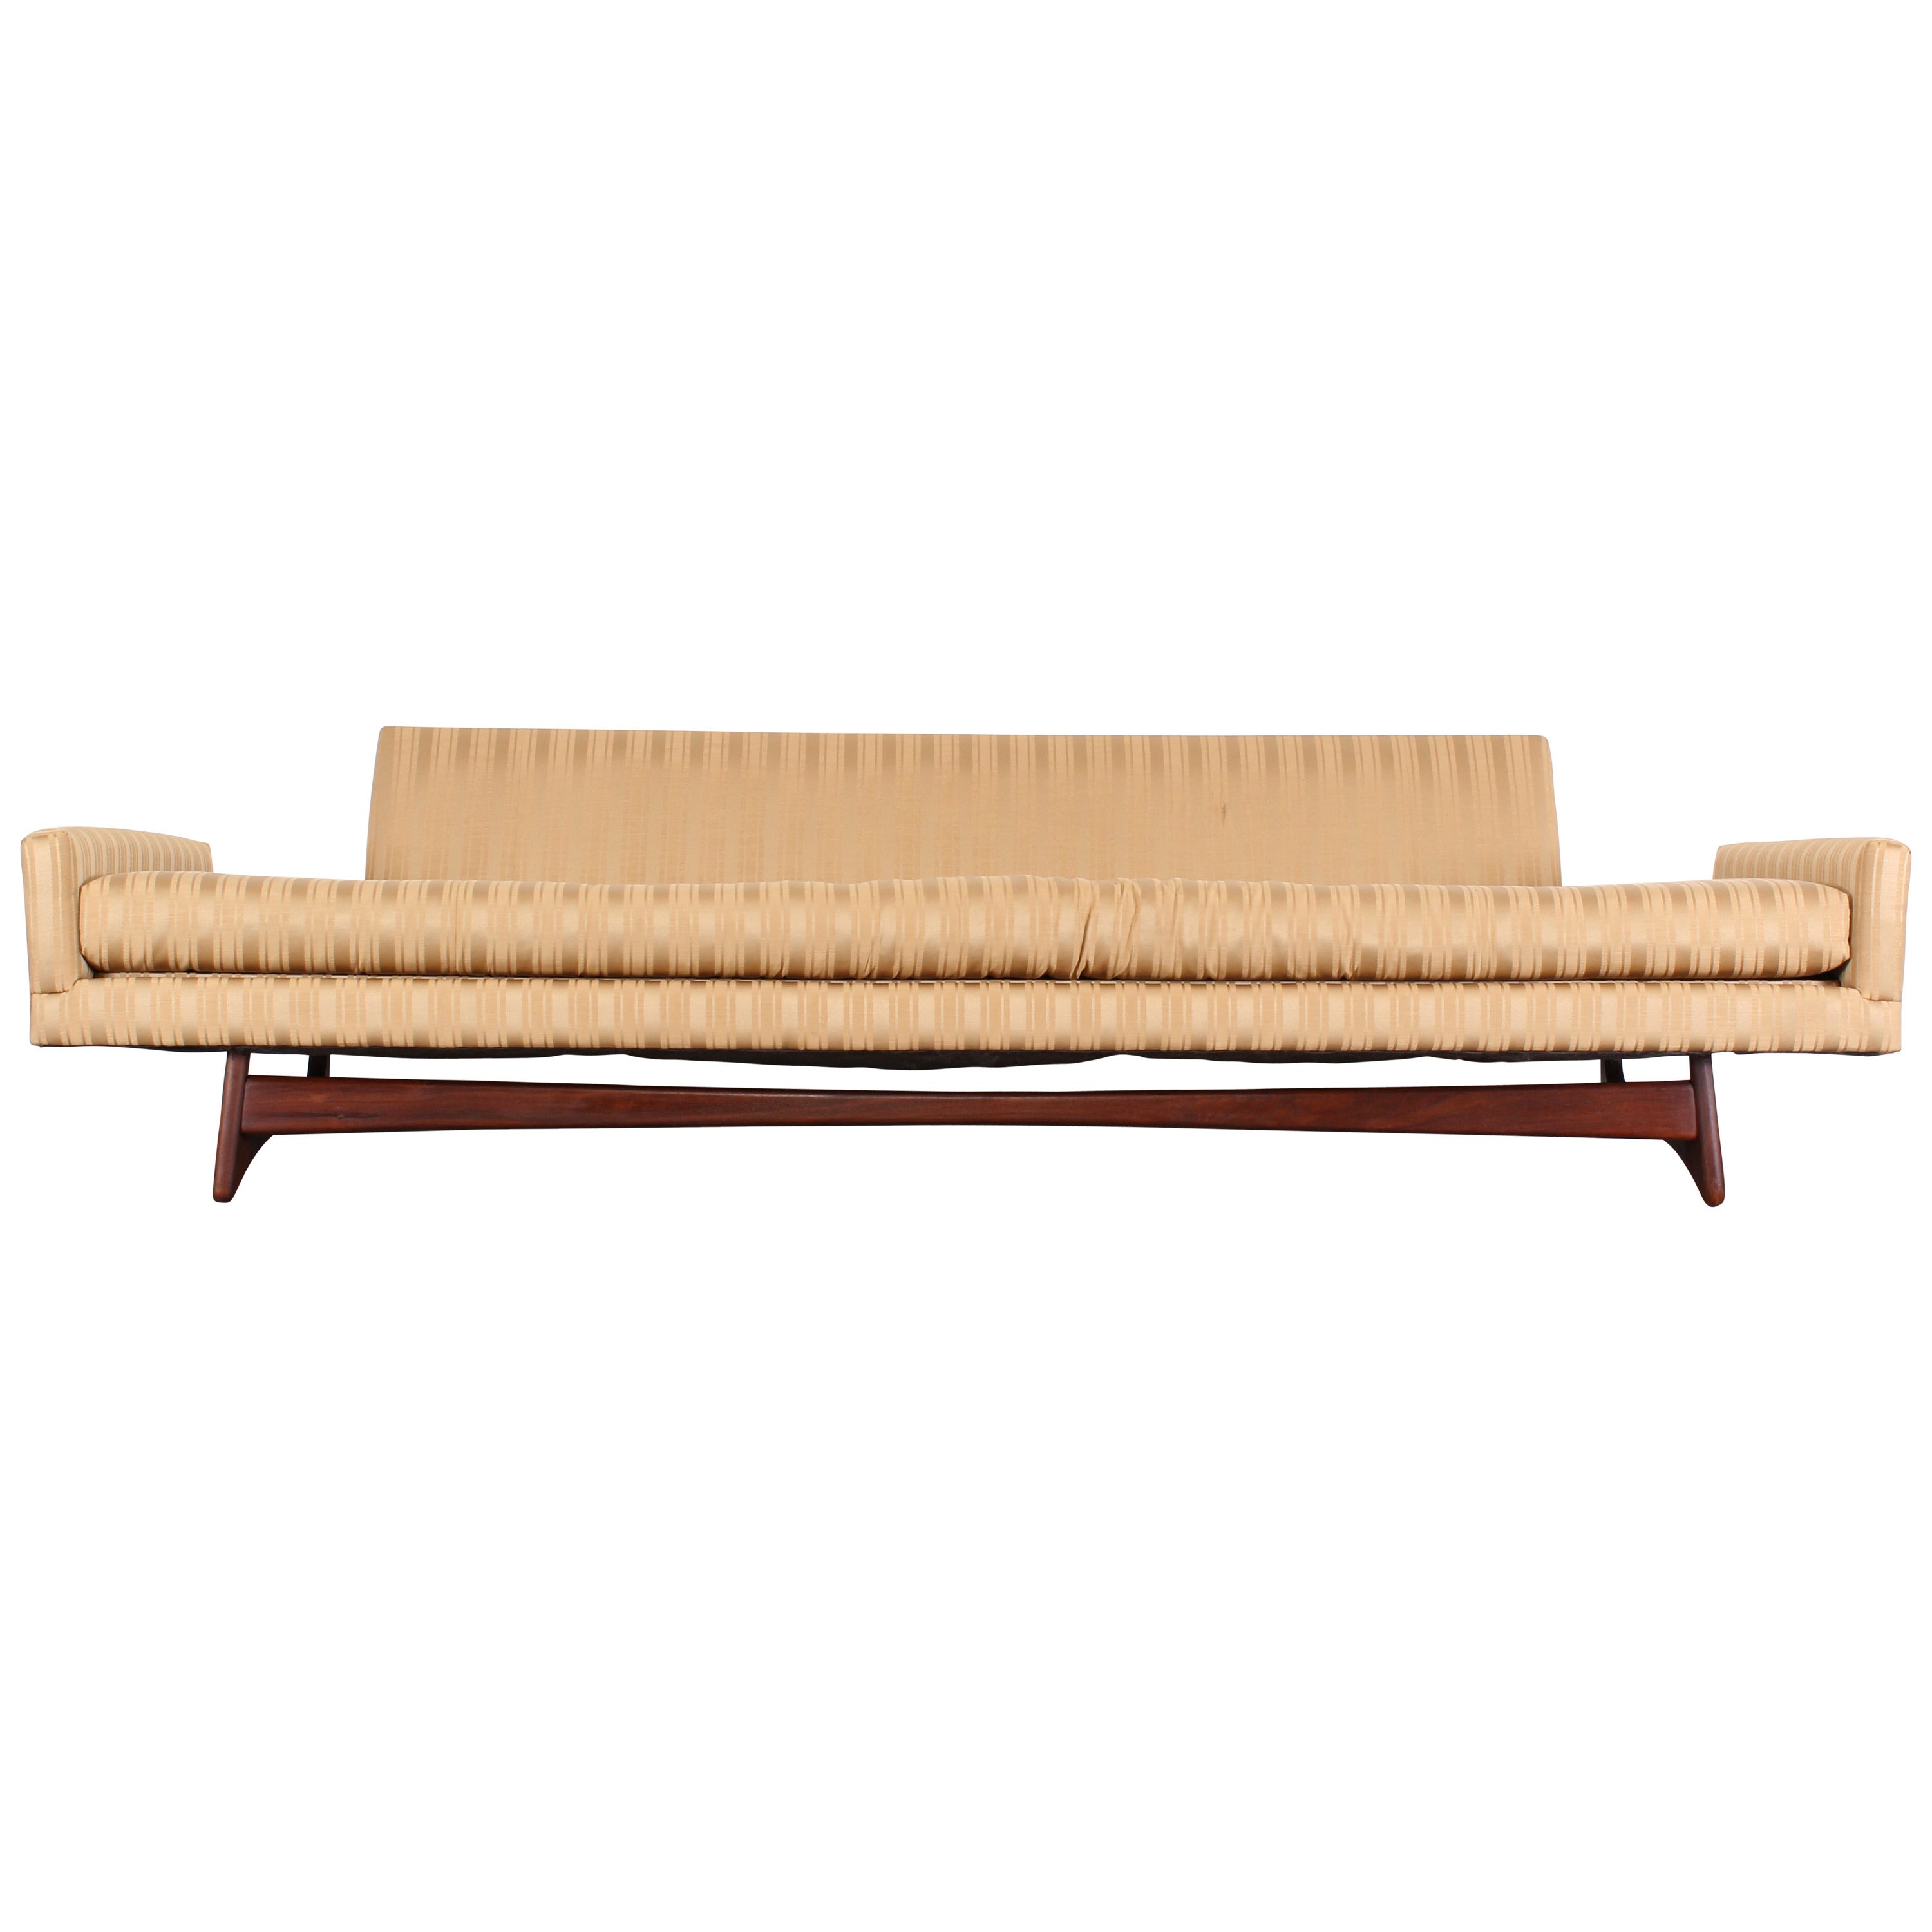 Extra Long Adrian Pearsall Sofa for Crafts Associates, Model 2408, 1960